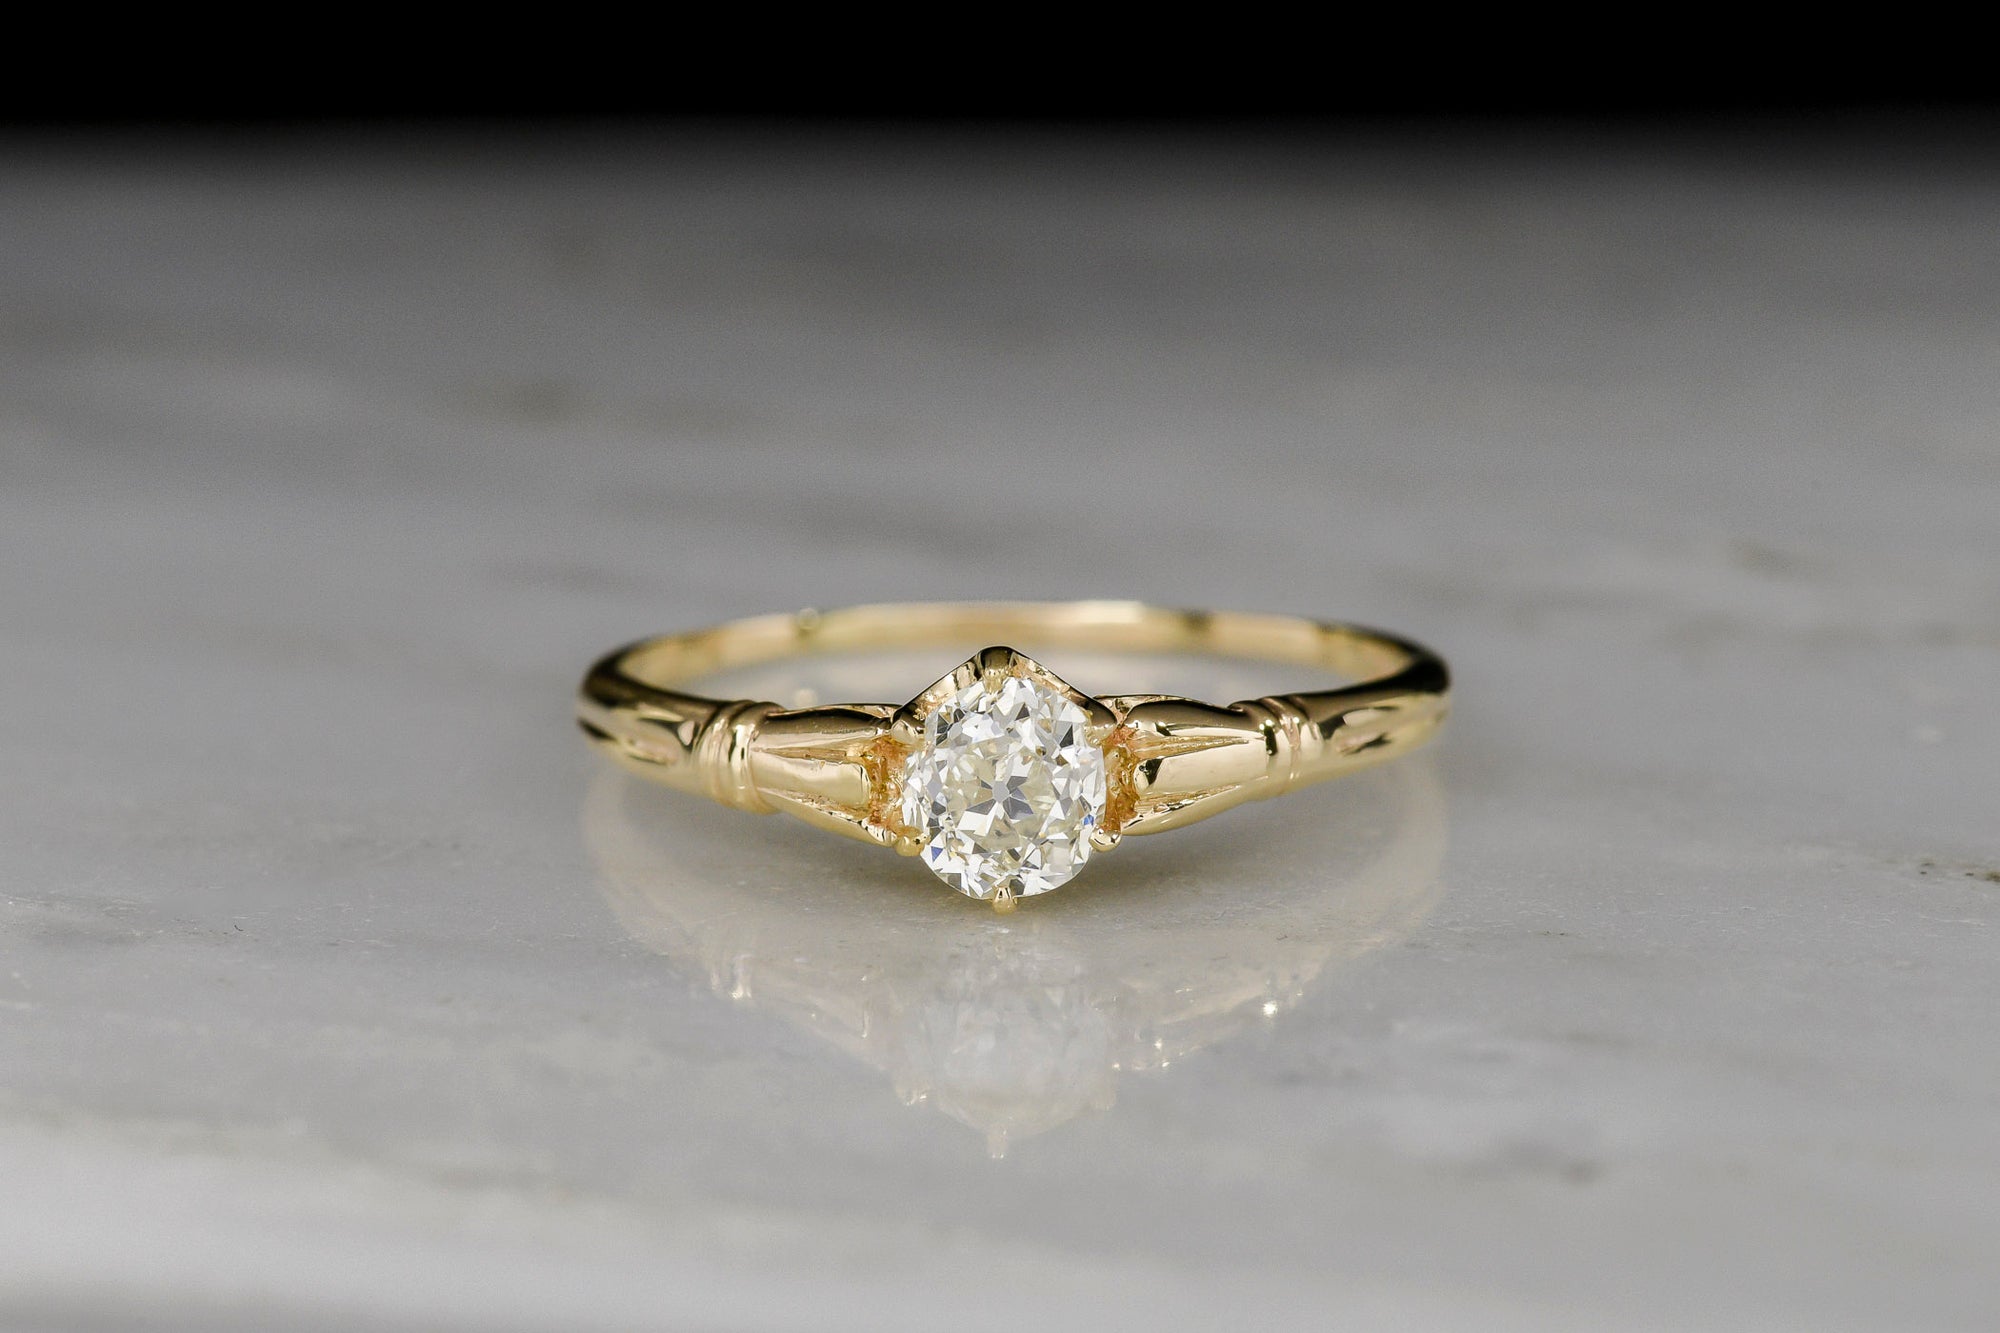 Vintage Early 1900s 14K Gold, Old Mine Cut Diamond and Seed